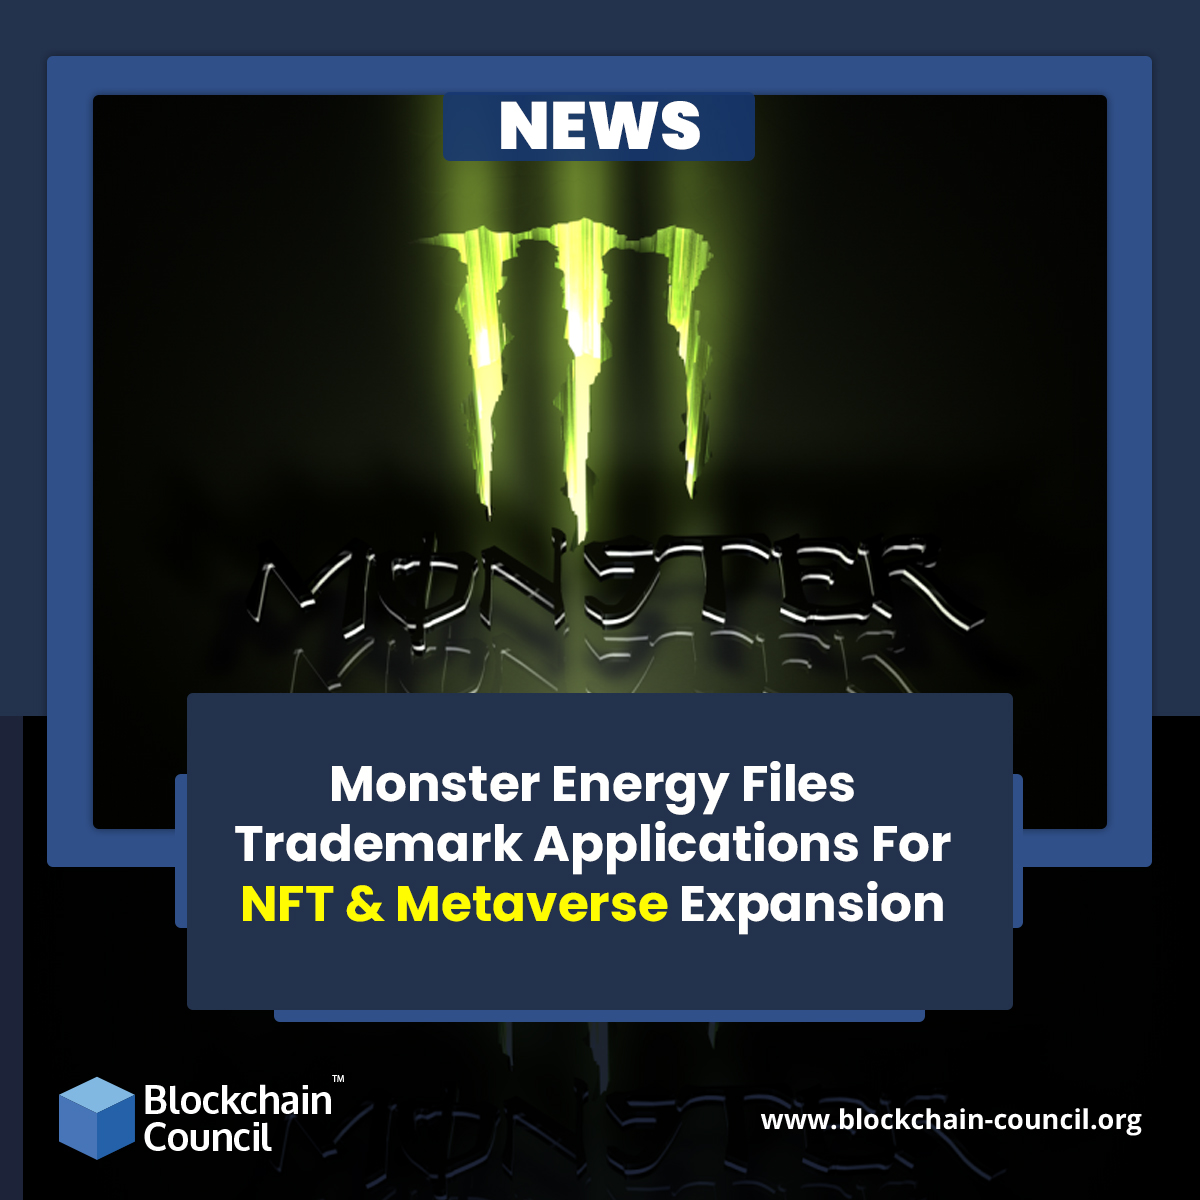 Monster Energy Files Trademark Applications For NFT & Metaverse Expansion